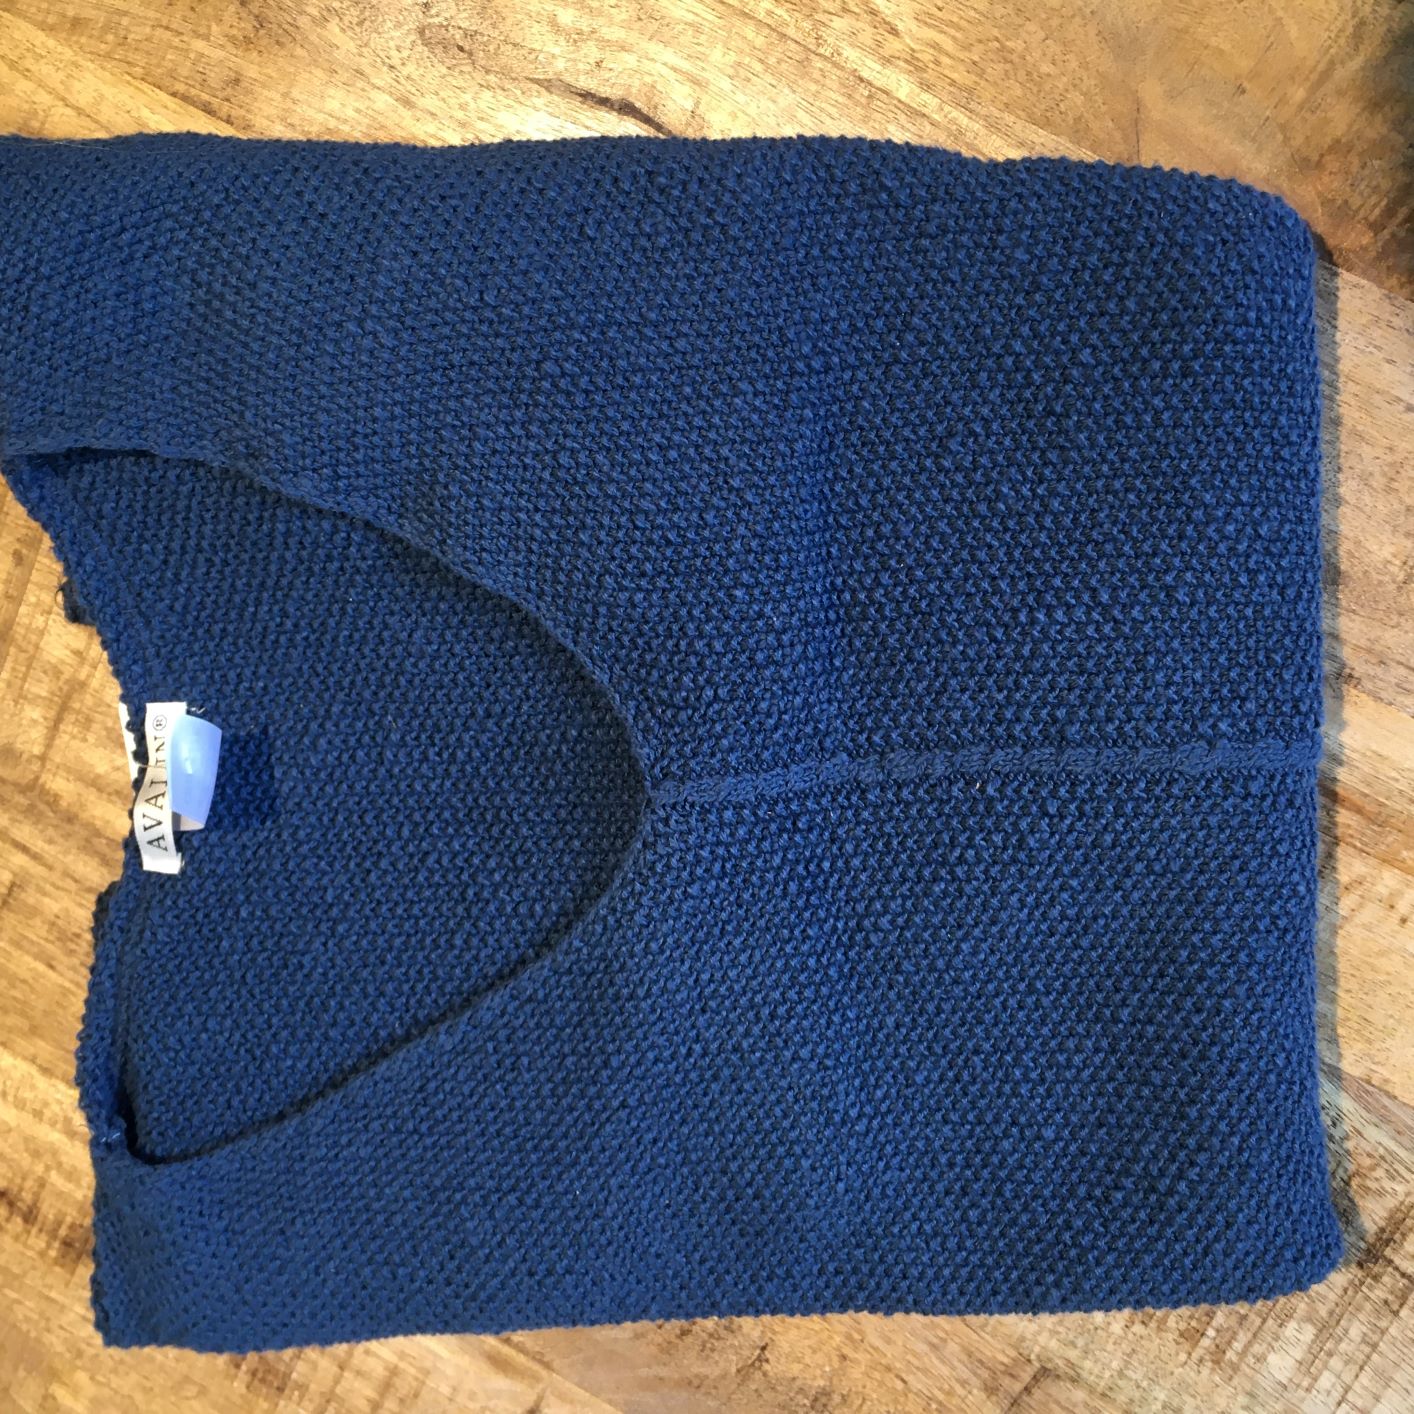 100% cotton slub seed stitch sweater by Avalin. In color Indigo navy blue  with long sleeves, v-neck, center seam, ribbed cuffs and ribbed straight hem with side slits. Falls just below mid hip.  Made in USA.